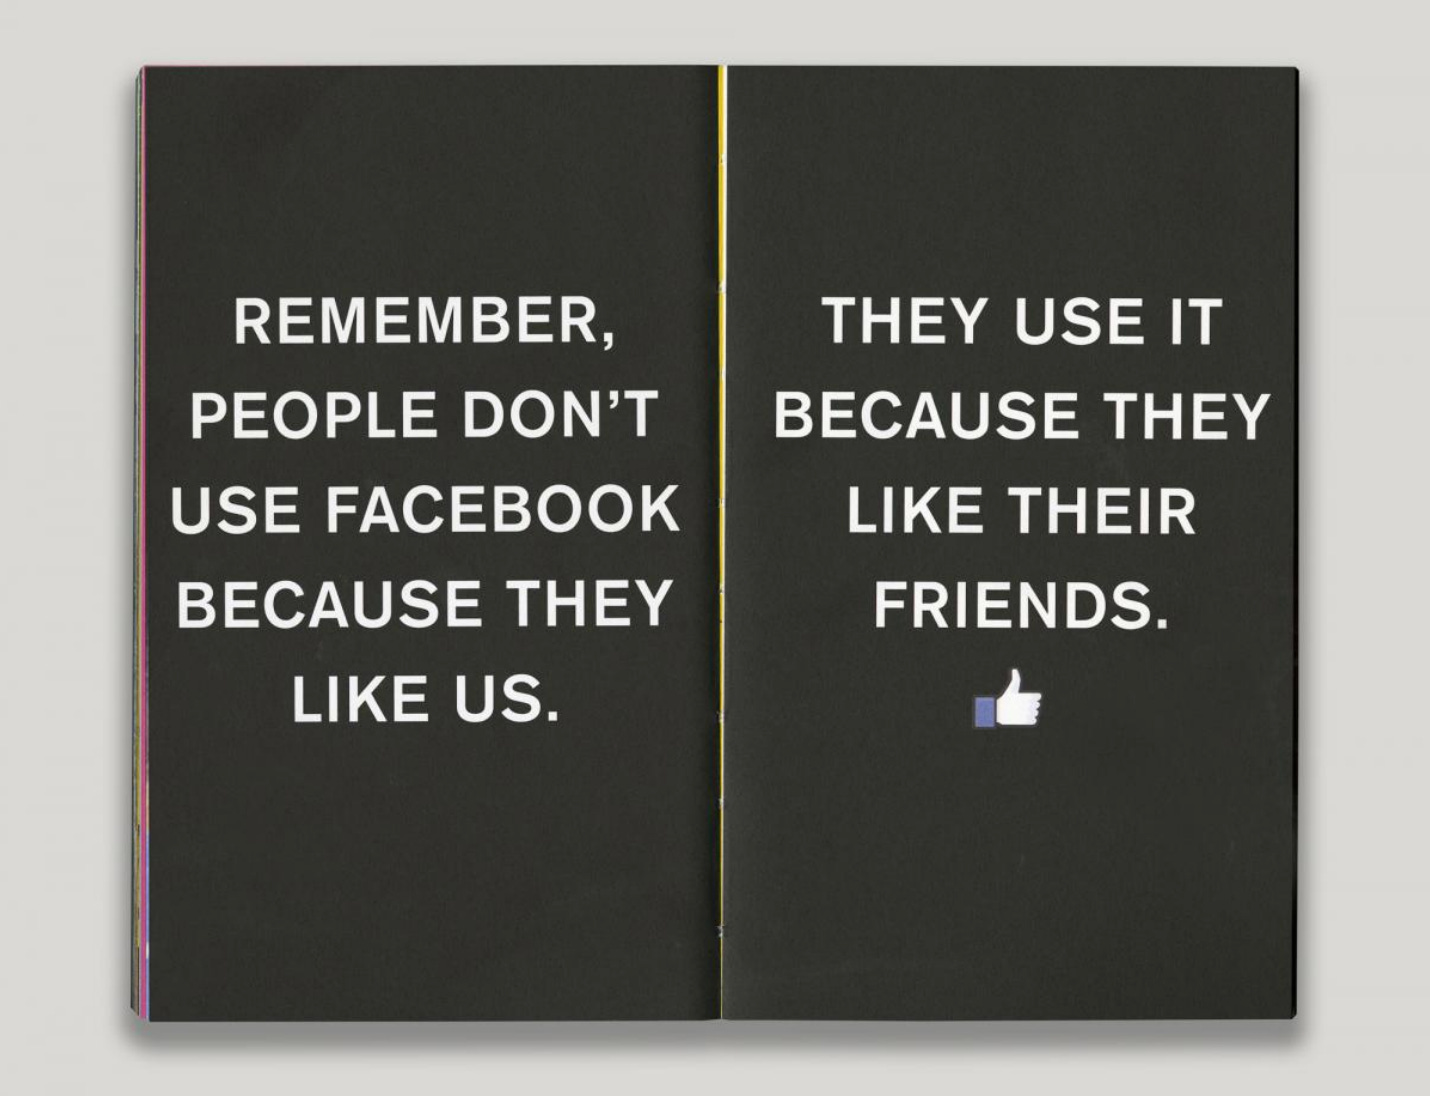 “Remember: people don’t use Facebook because they like us. They use it because they like their friends.” - from Facebook’s Little Red Book